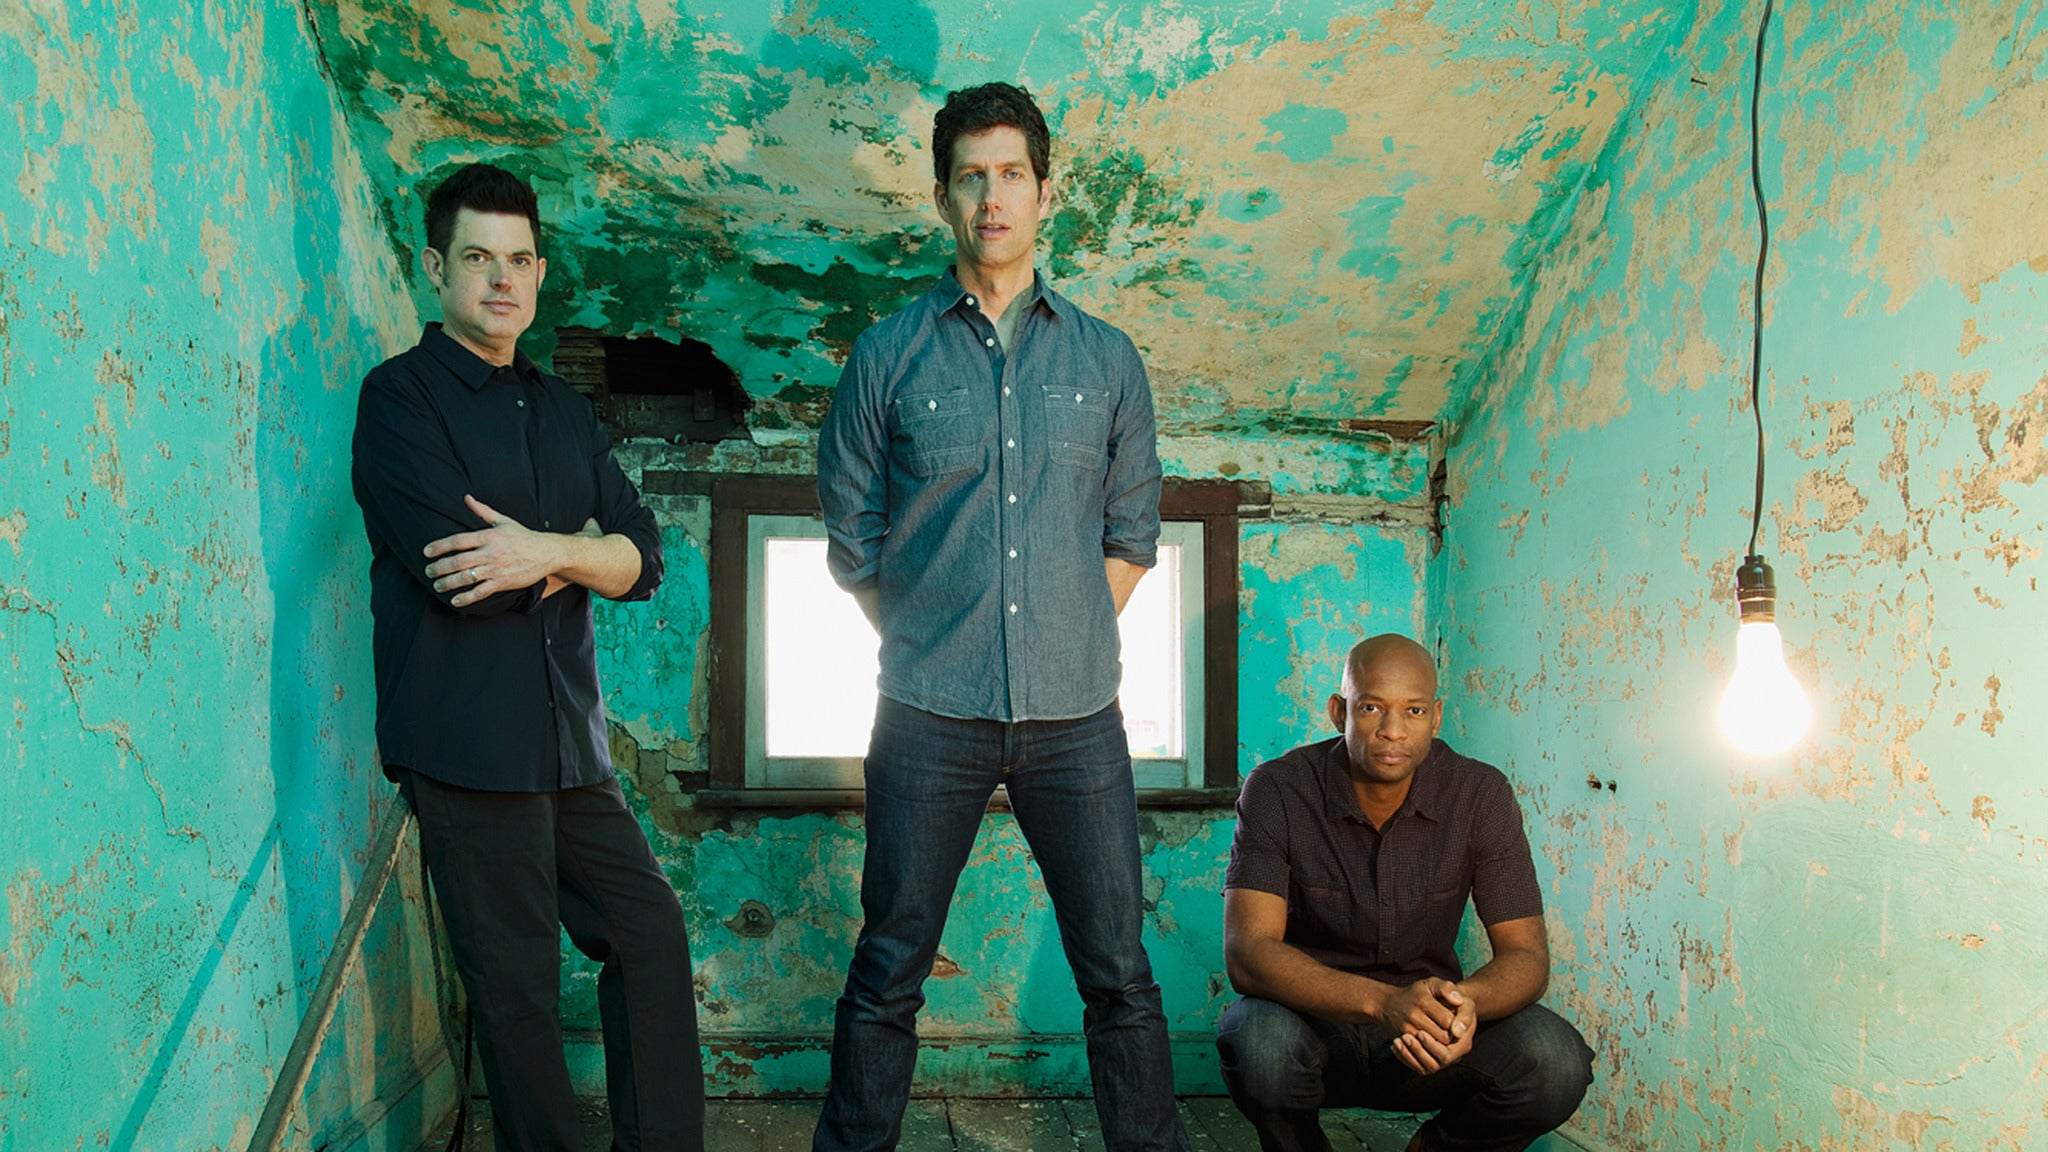 Better Than Ezra: Legends of the Fall 2022 Tour presale code for show tickets in Chicago, IL (House of Blues Chicago)